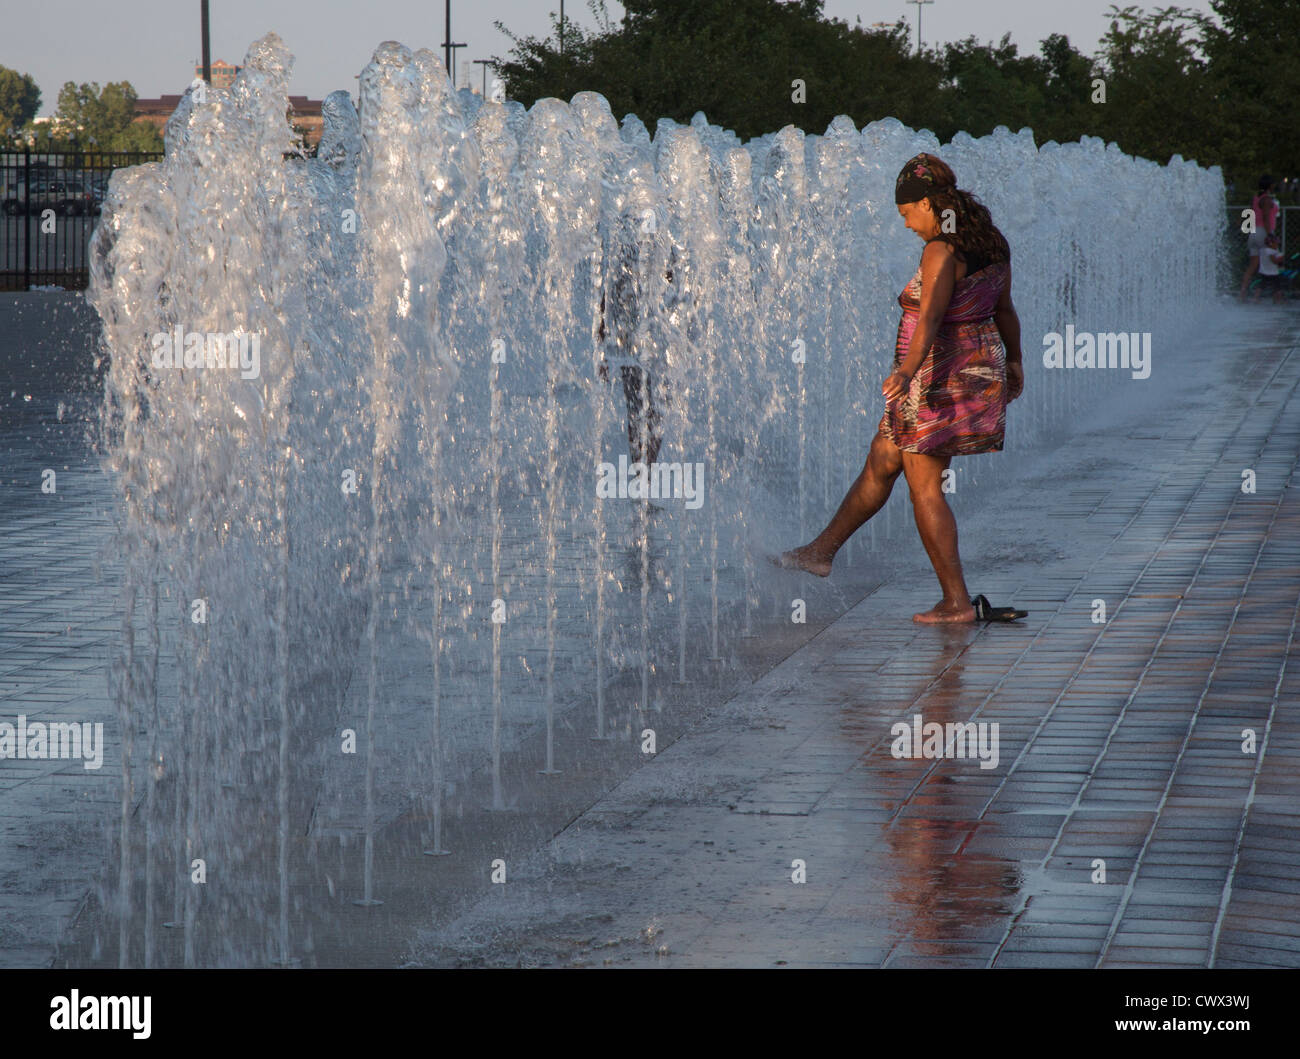 Detroit, Michigan - A woman sticks her toe in a fountain on the Detroit Riverwalk. Stock Photo